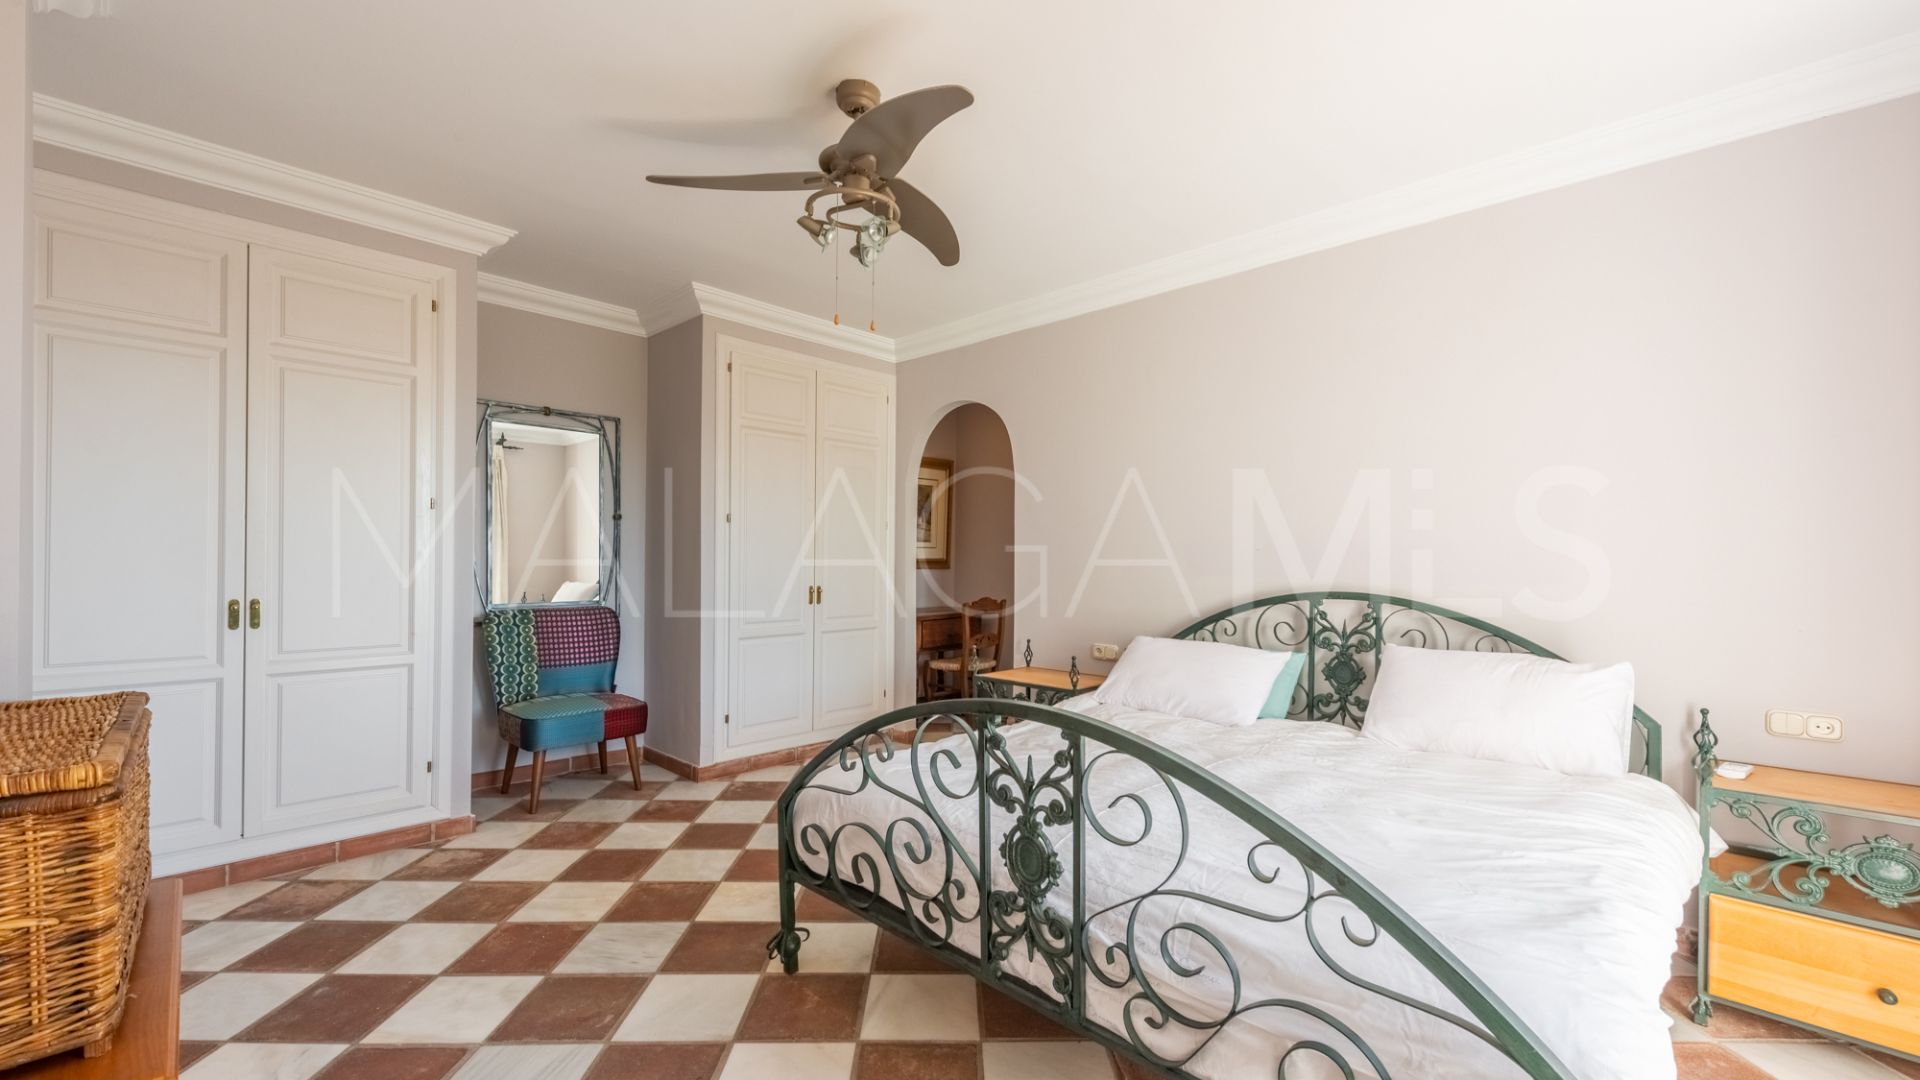 For sale La Heredia town house with 3 bedrooms